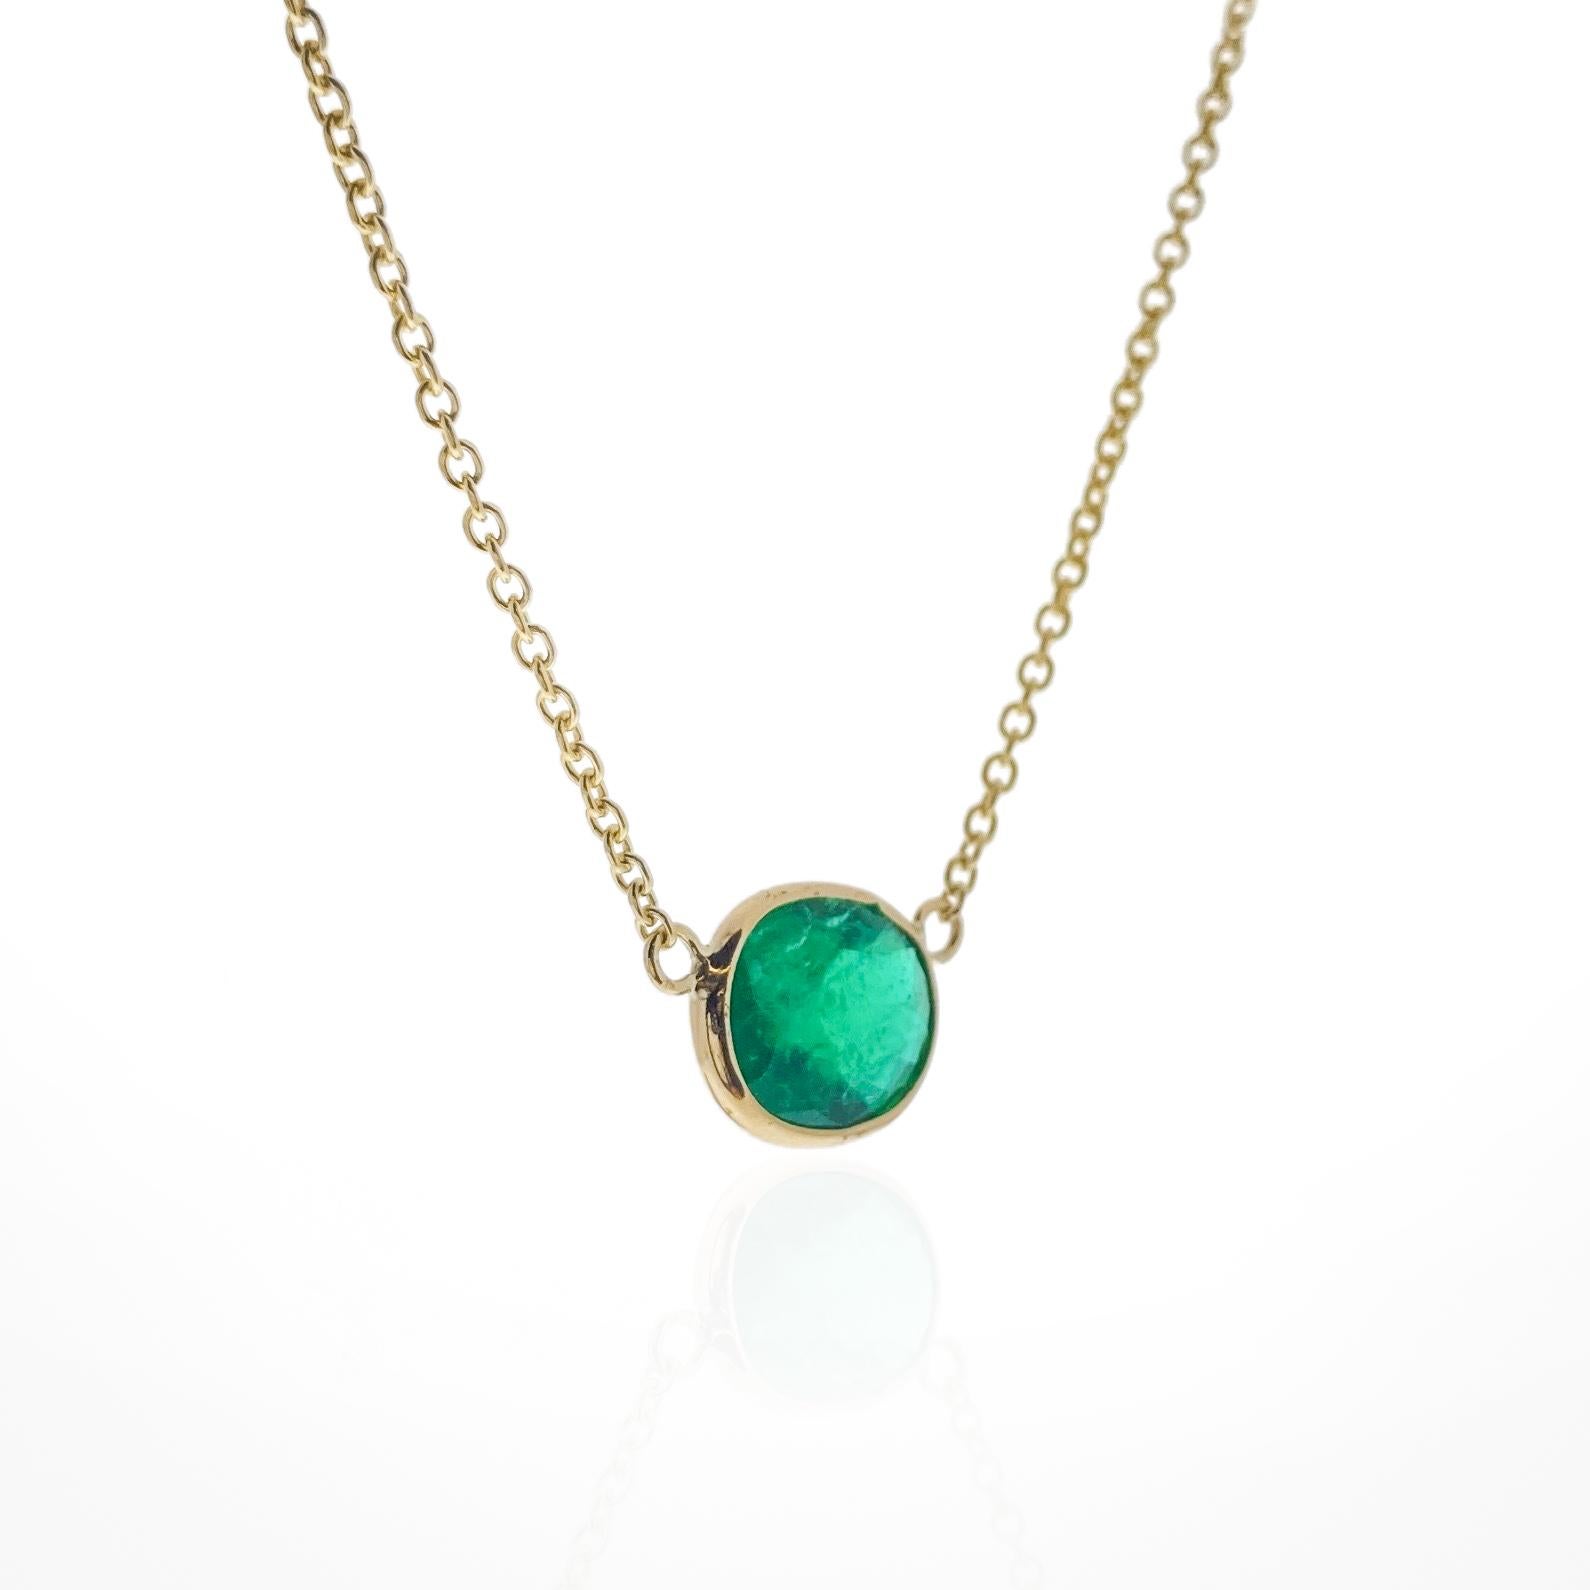 Contemporary 1.65 Carat Green Emerald Oval Cut Fashion Necklaces In 14K Yellow Gold For Sale